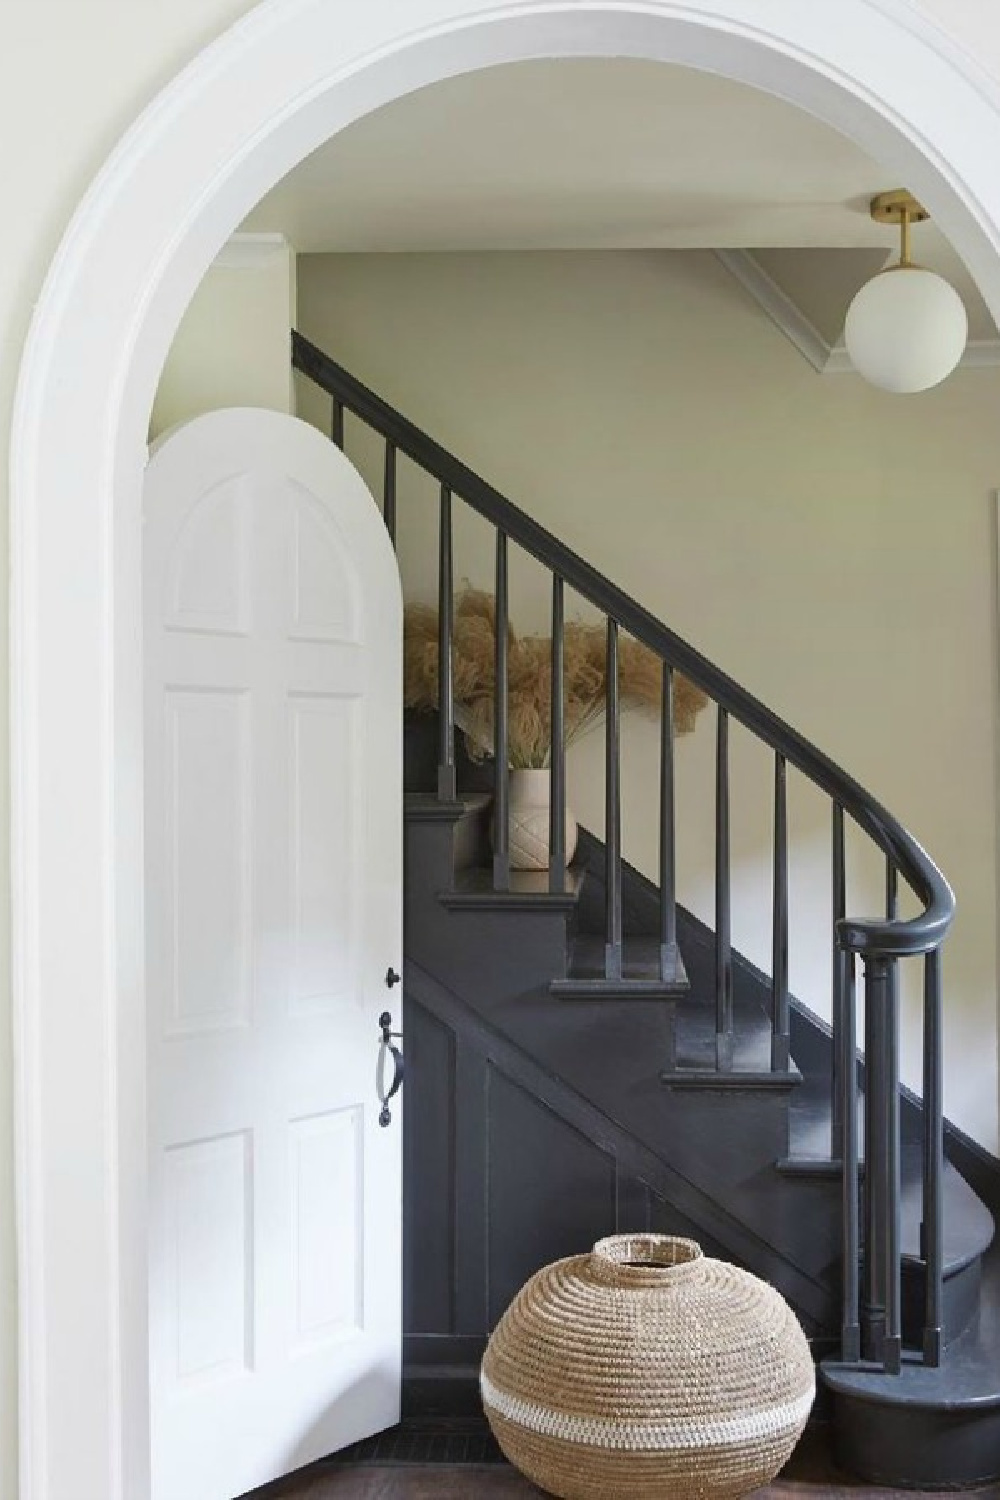 Leanne Ford painted this gorgeous staircase PPG Black Magic, Walls: PPG Sugar Soap; trim: Delicate White; Stairs: Black Magic. #whitepaintcolors #leanneford #restoredbythefords